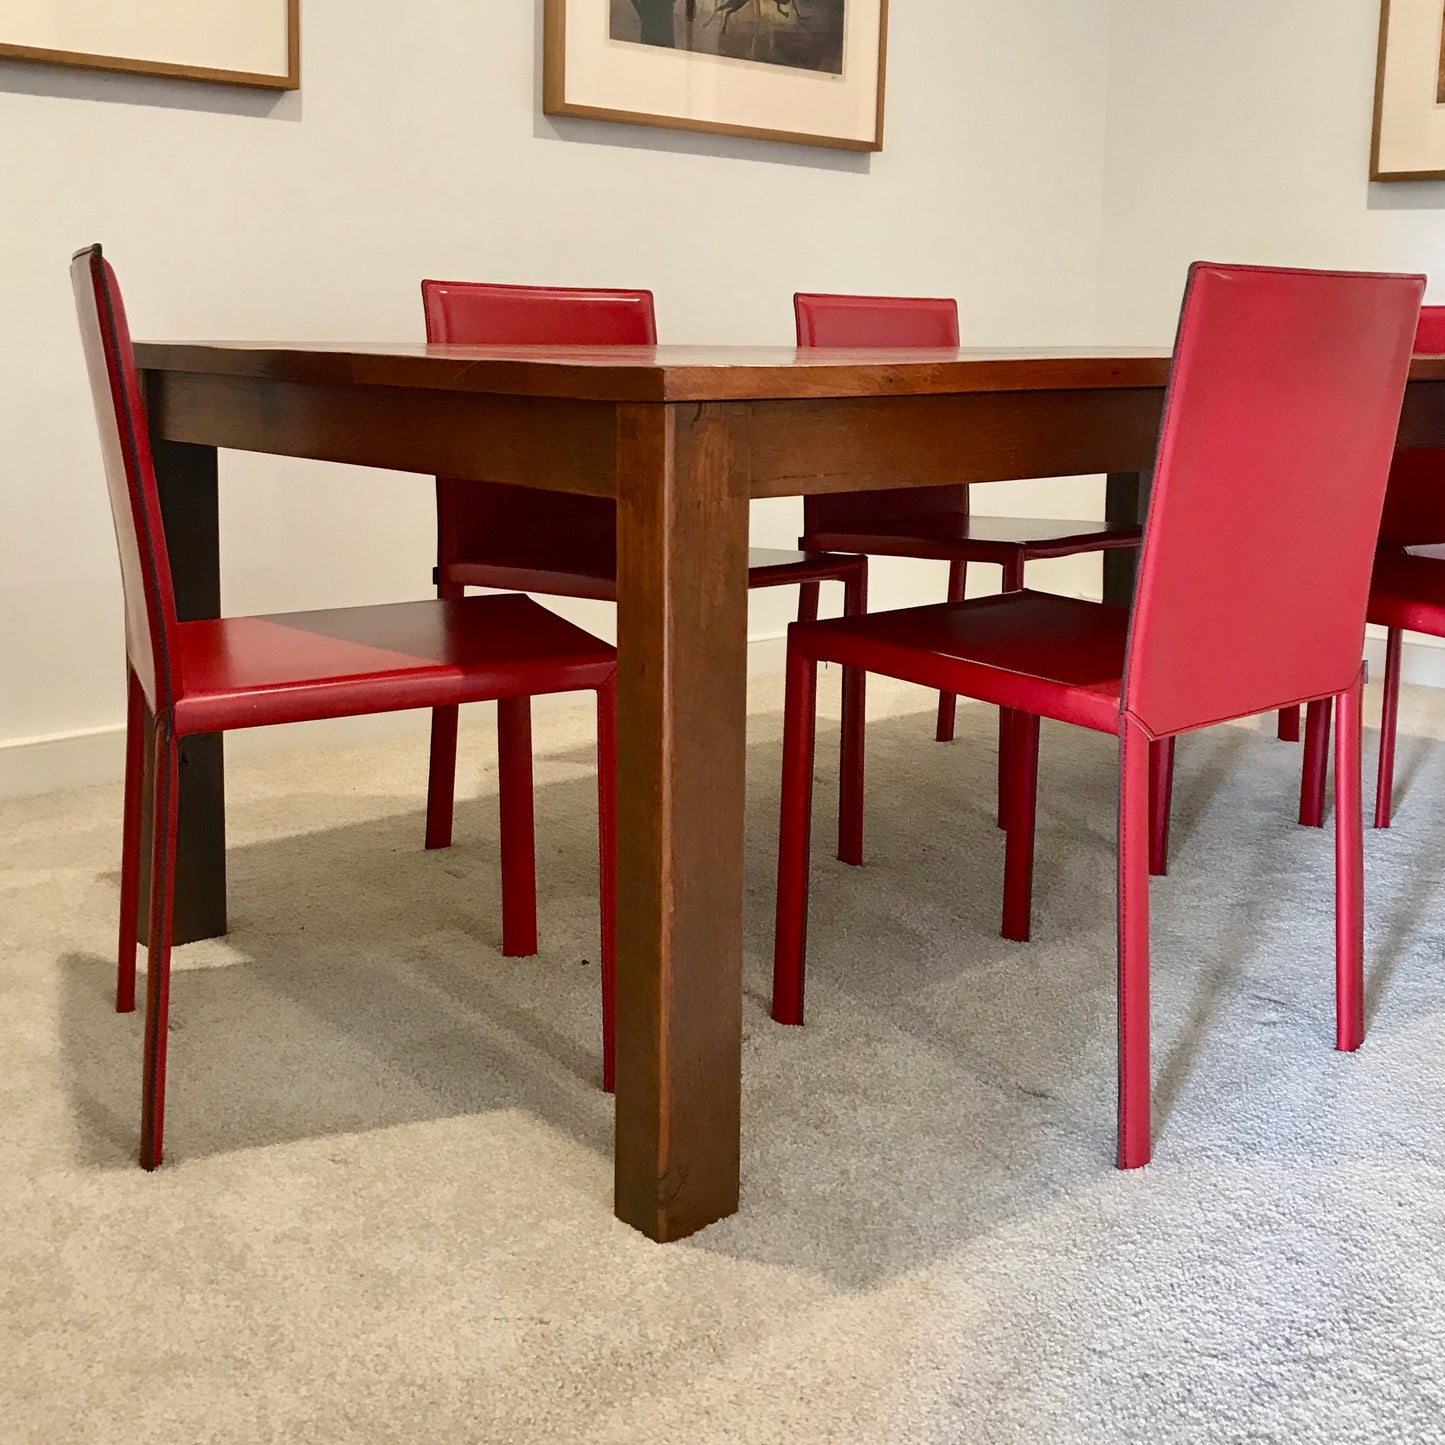 Set of FOUR Slim Dining Chairs by Kristalia through Fanuli